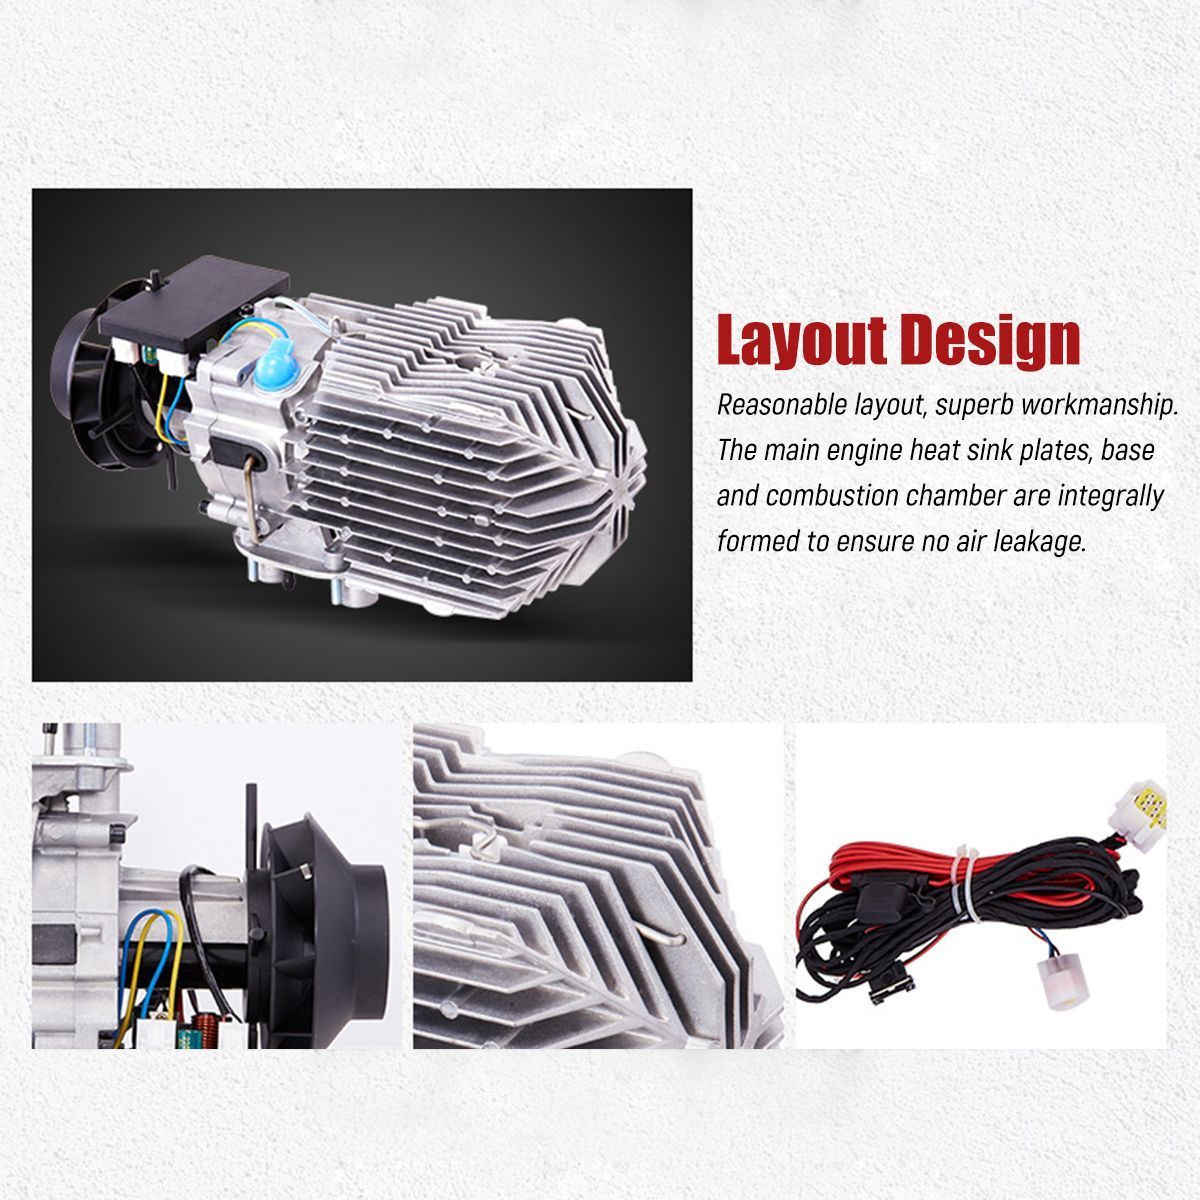 5KW-12V-Diesel-Air-Heater-LCD-Thermostat-with-Switch-Remote-Control-Silencer-For-Motorhome-Boat-1377908